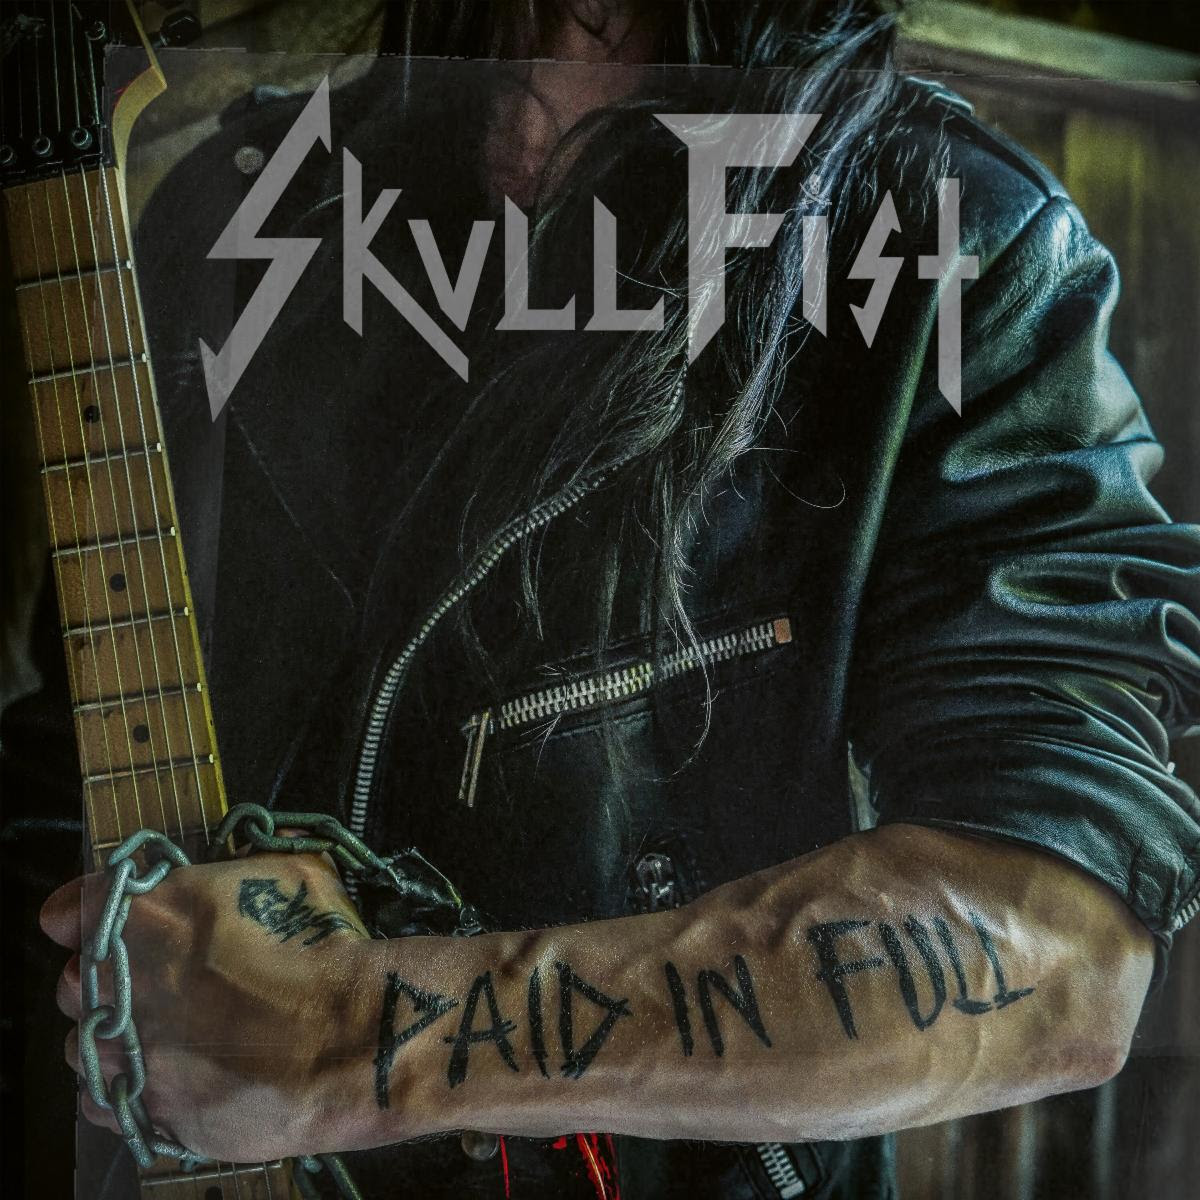 SKULL FIST: Canadian Heavy Metal Trio Releases New Video For “Madman;”